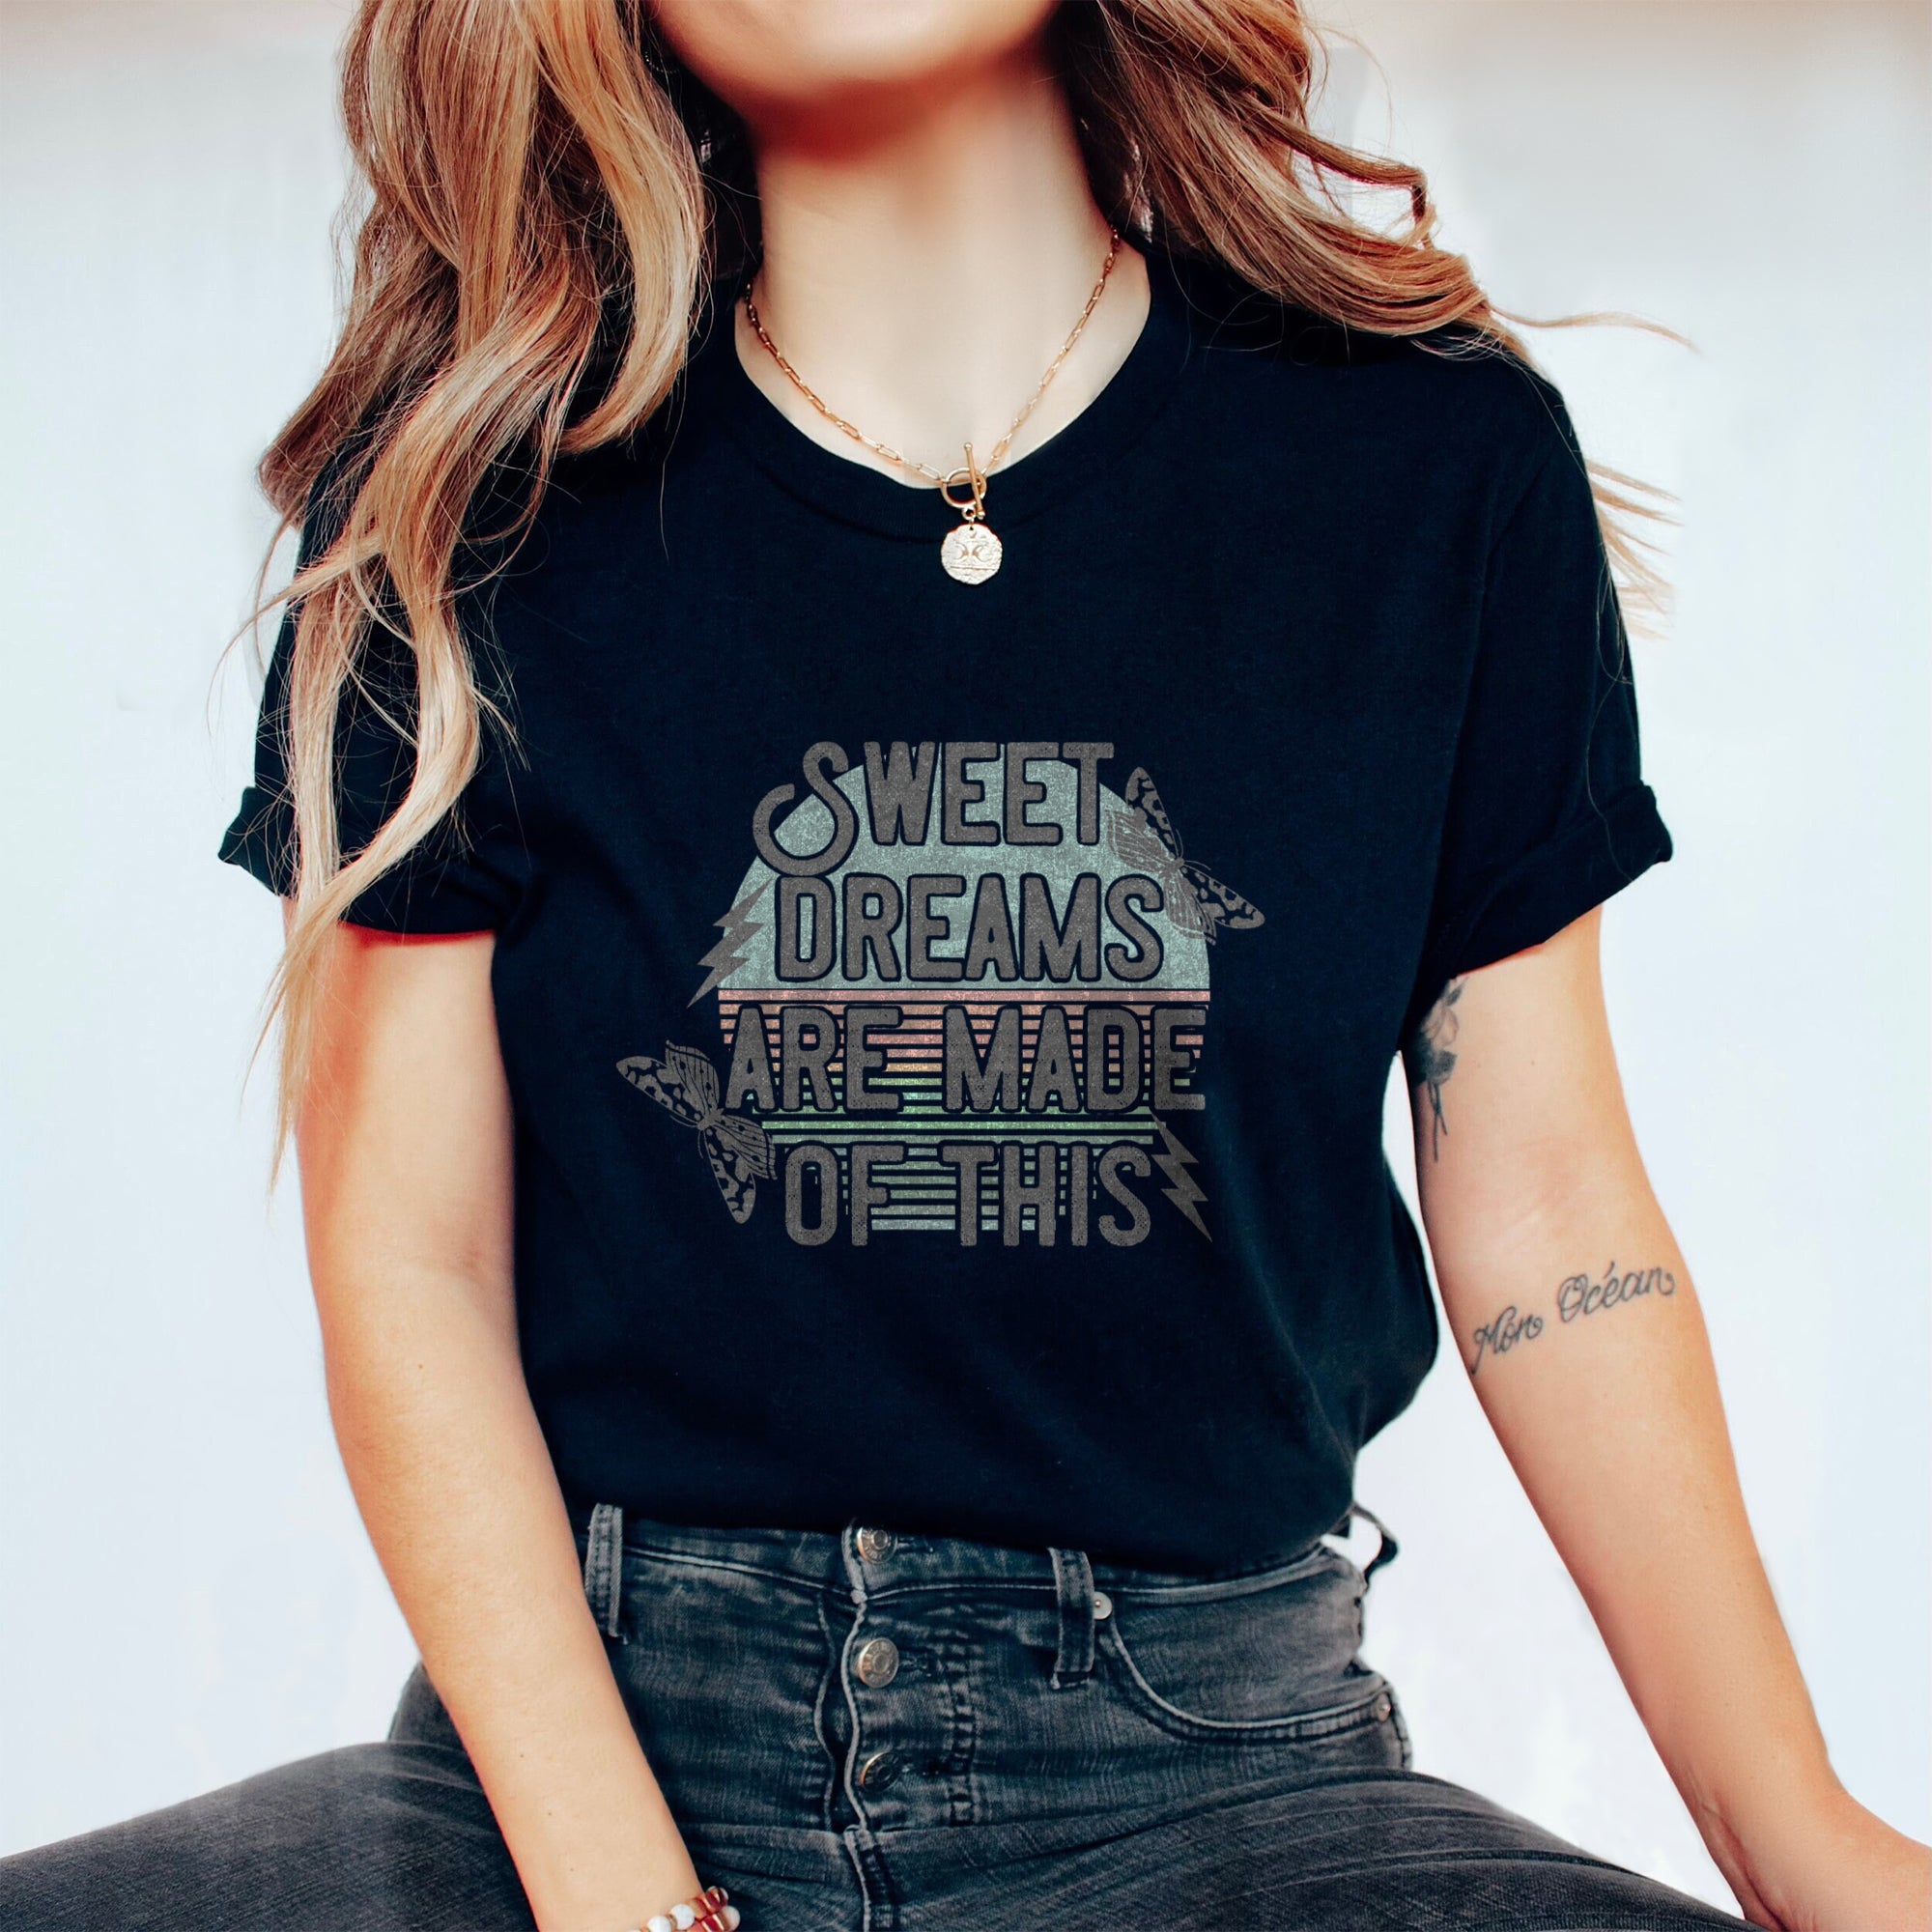 Don't be a Lady, Be a Legend for Women Garment-Dyed Graphic Tee